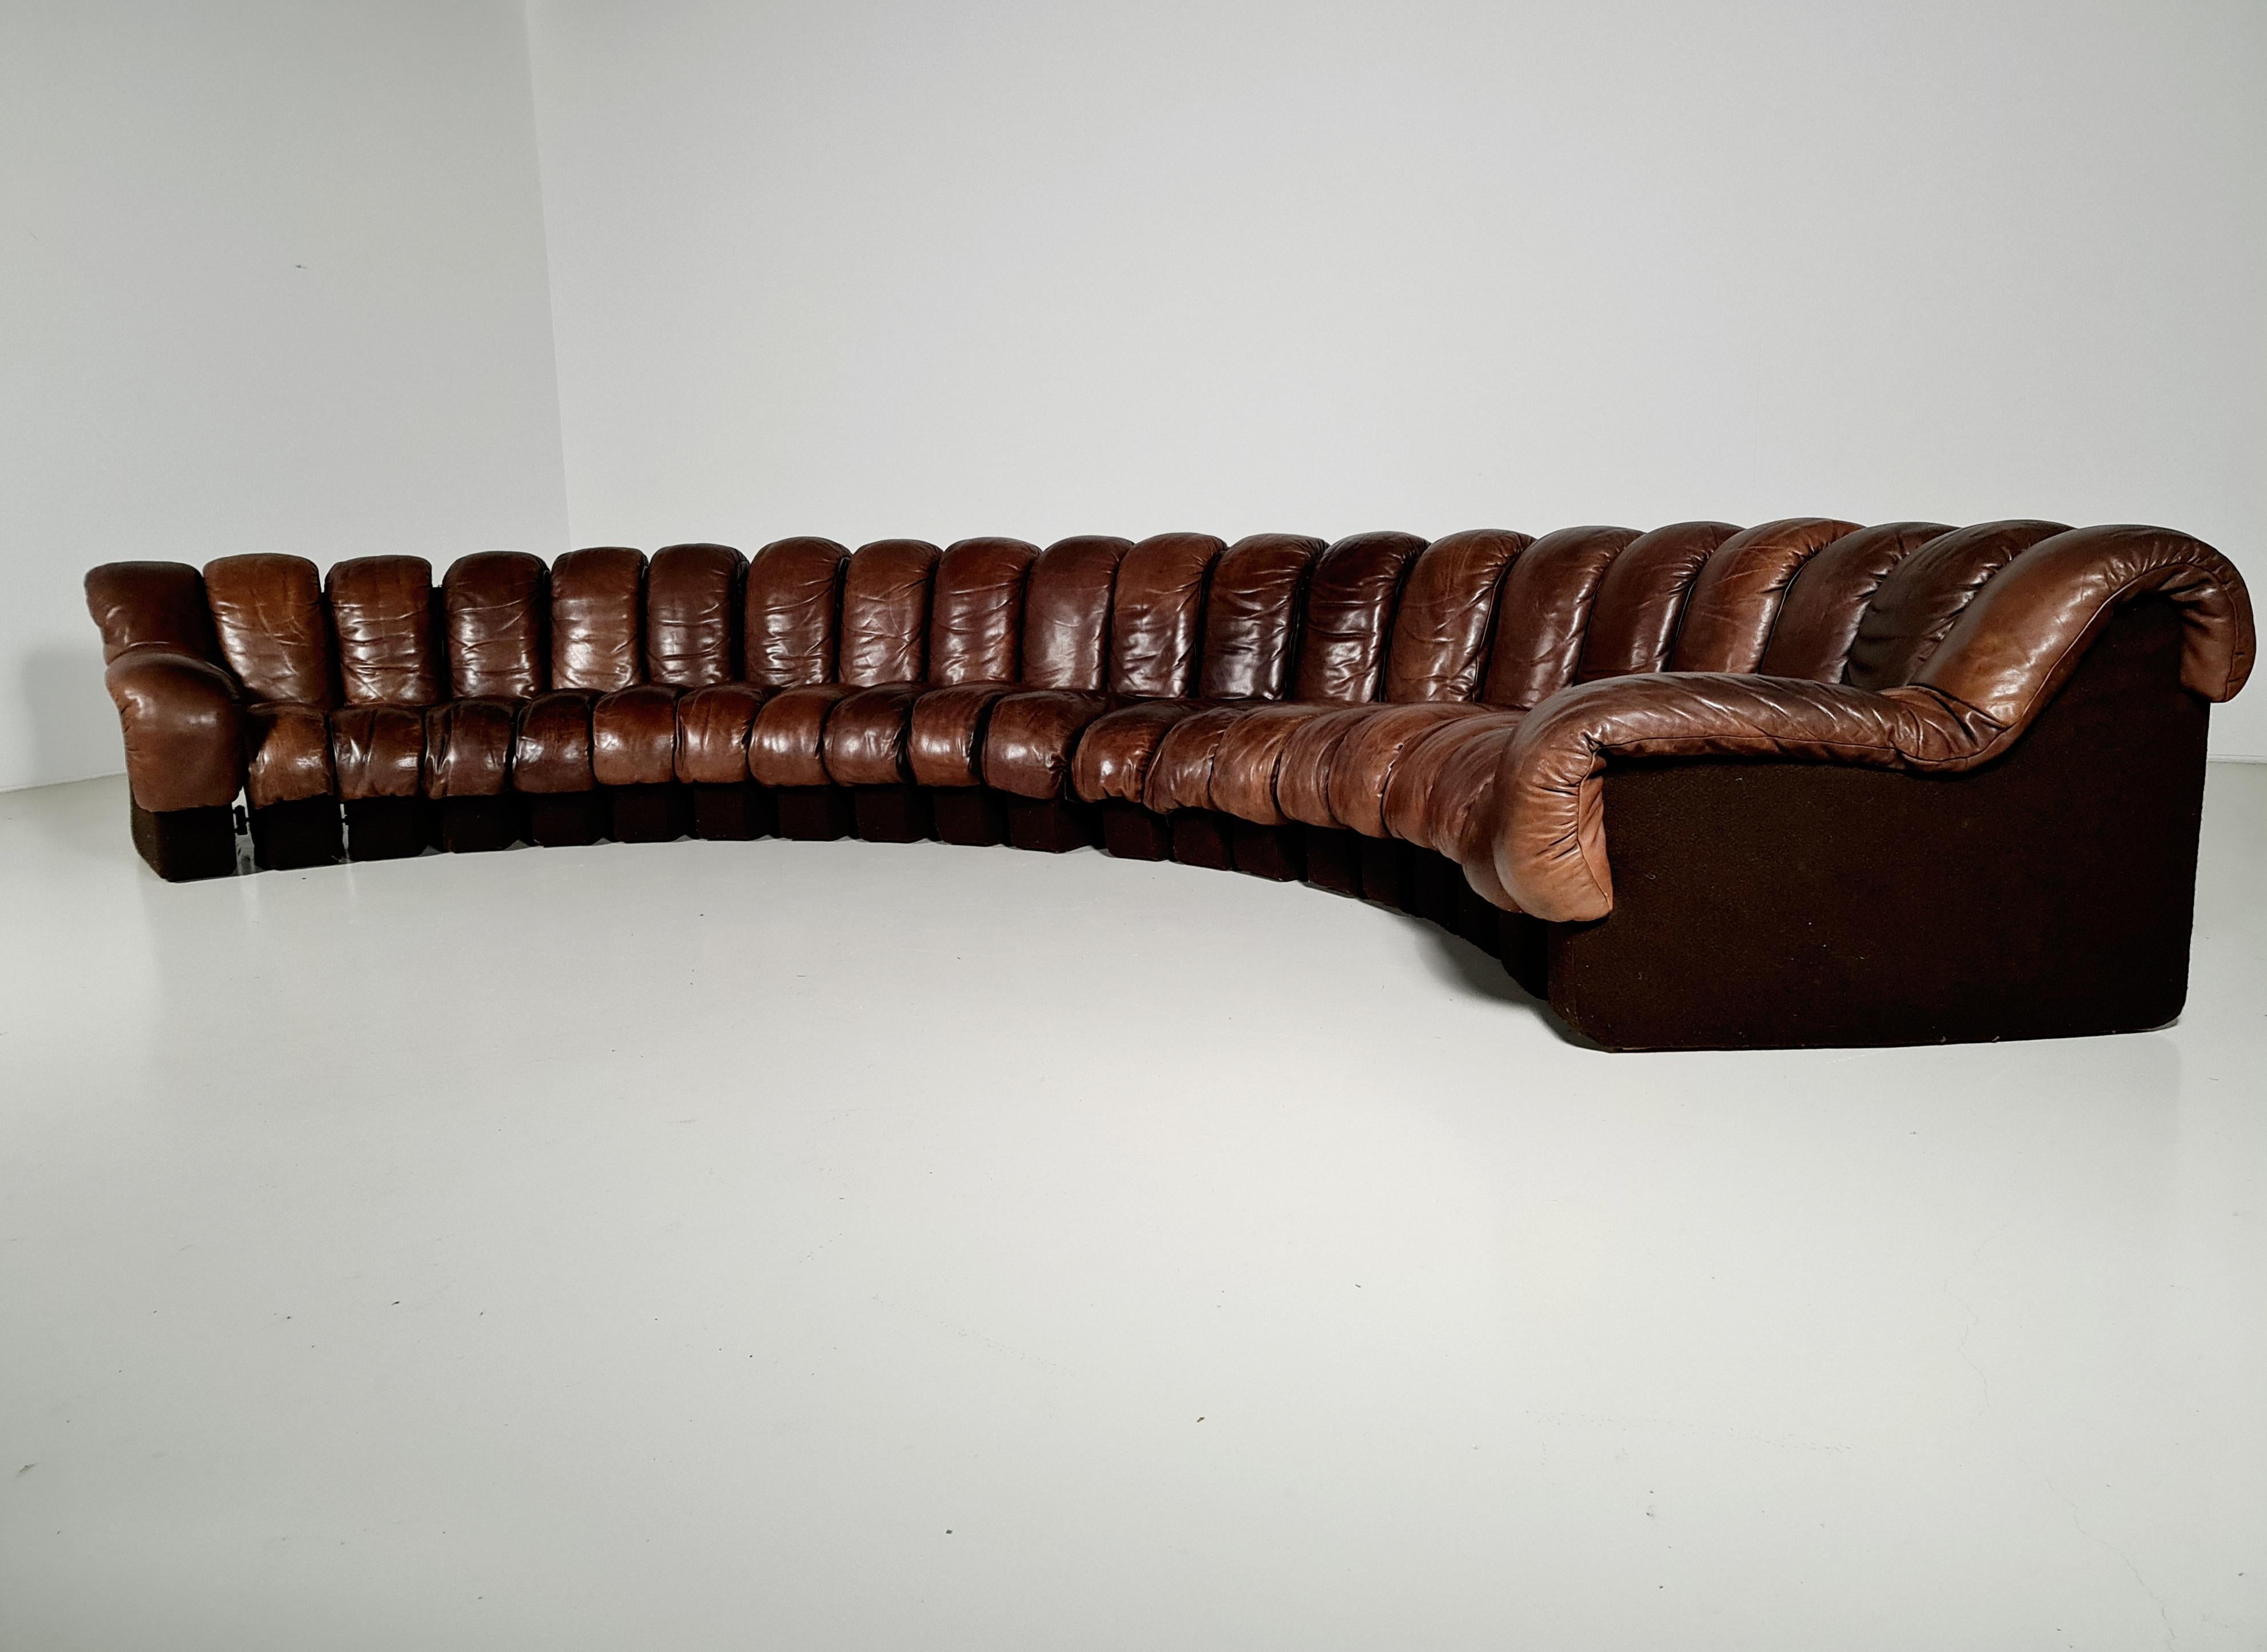 De Sede, DS600, 1970s

This De Sede sofa in stunning patinated brown leather is designed by Ueli Bergere, Elenora Peduzzi-Riva, Heinz Ulrich and Klaus Vogt. This sectional sofa contains 20 seating pieces with two armrests. The pieces can be zipped